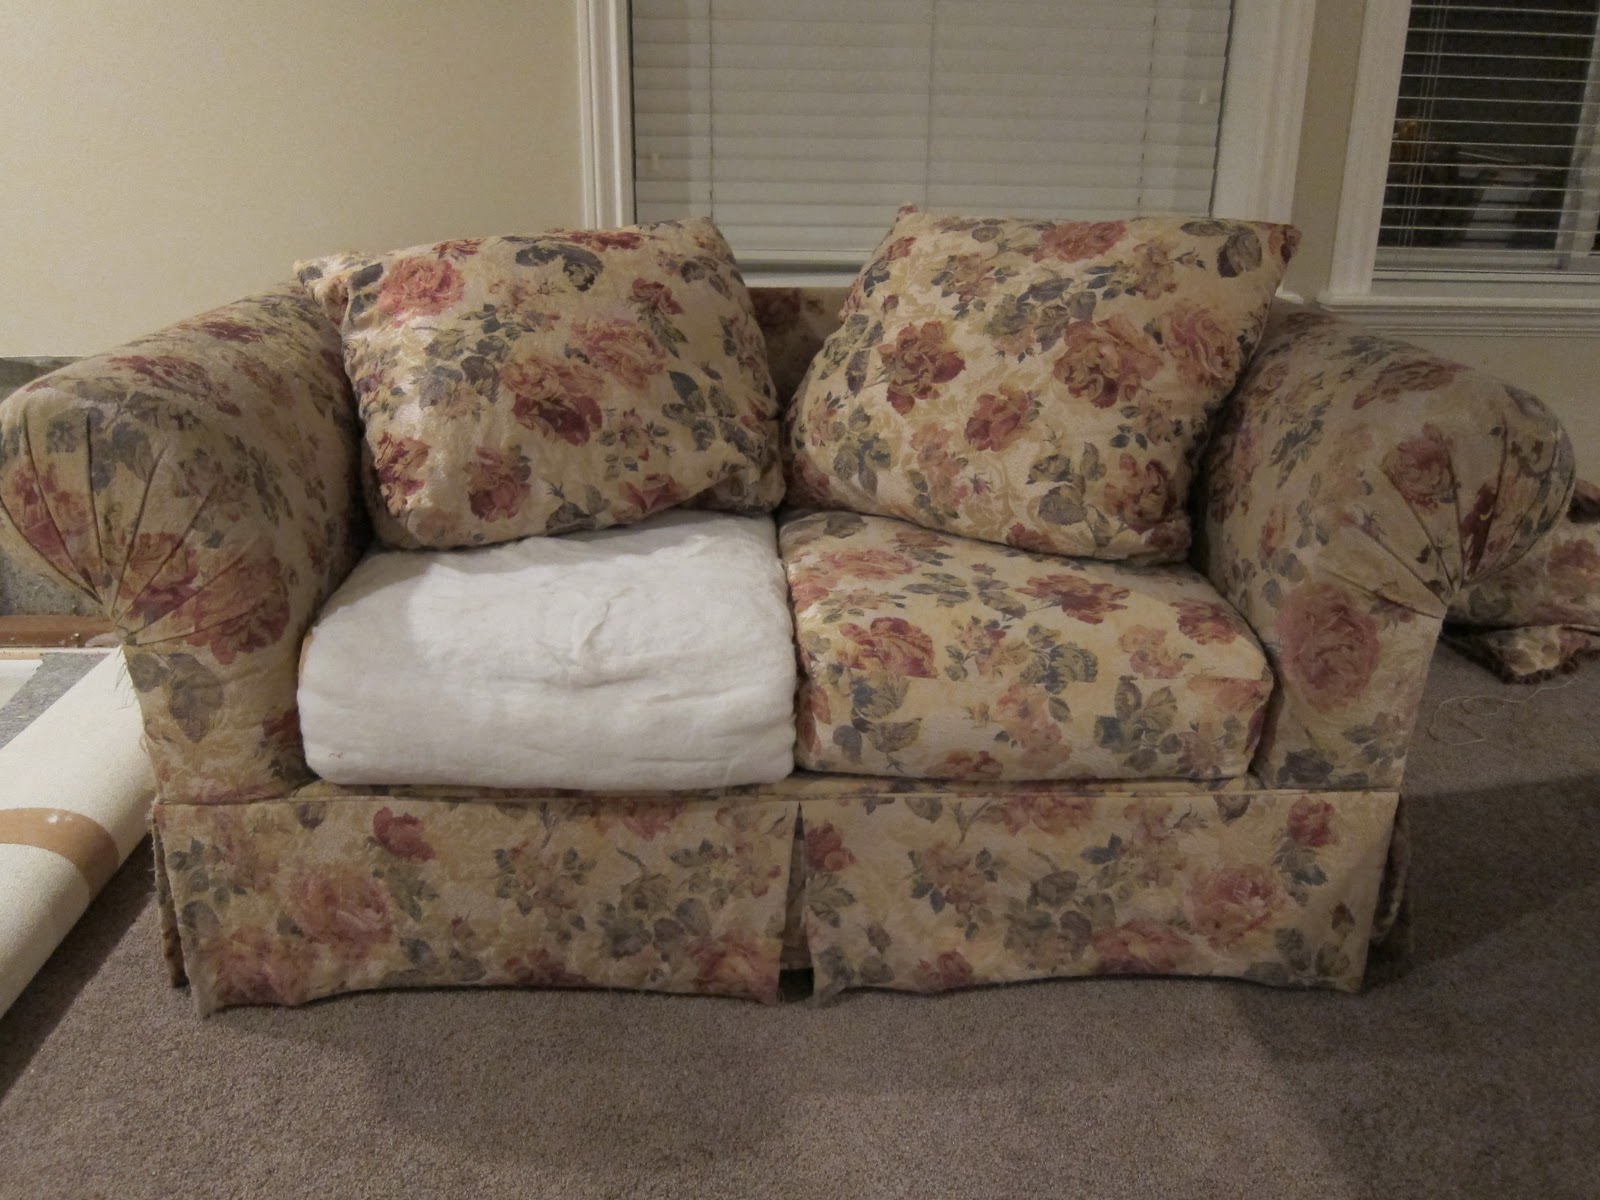 do it yourself divas: DIY Strip Fabric From a Couch and Reupholster It